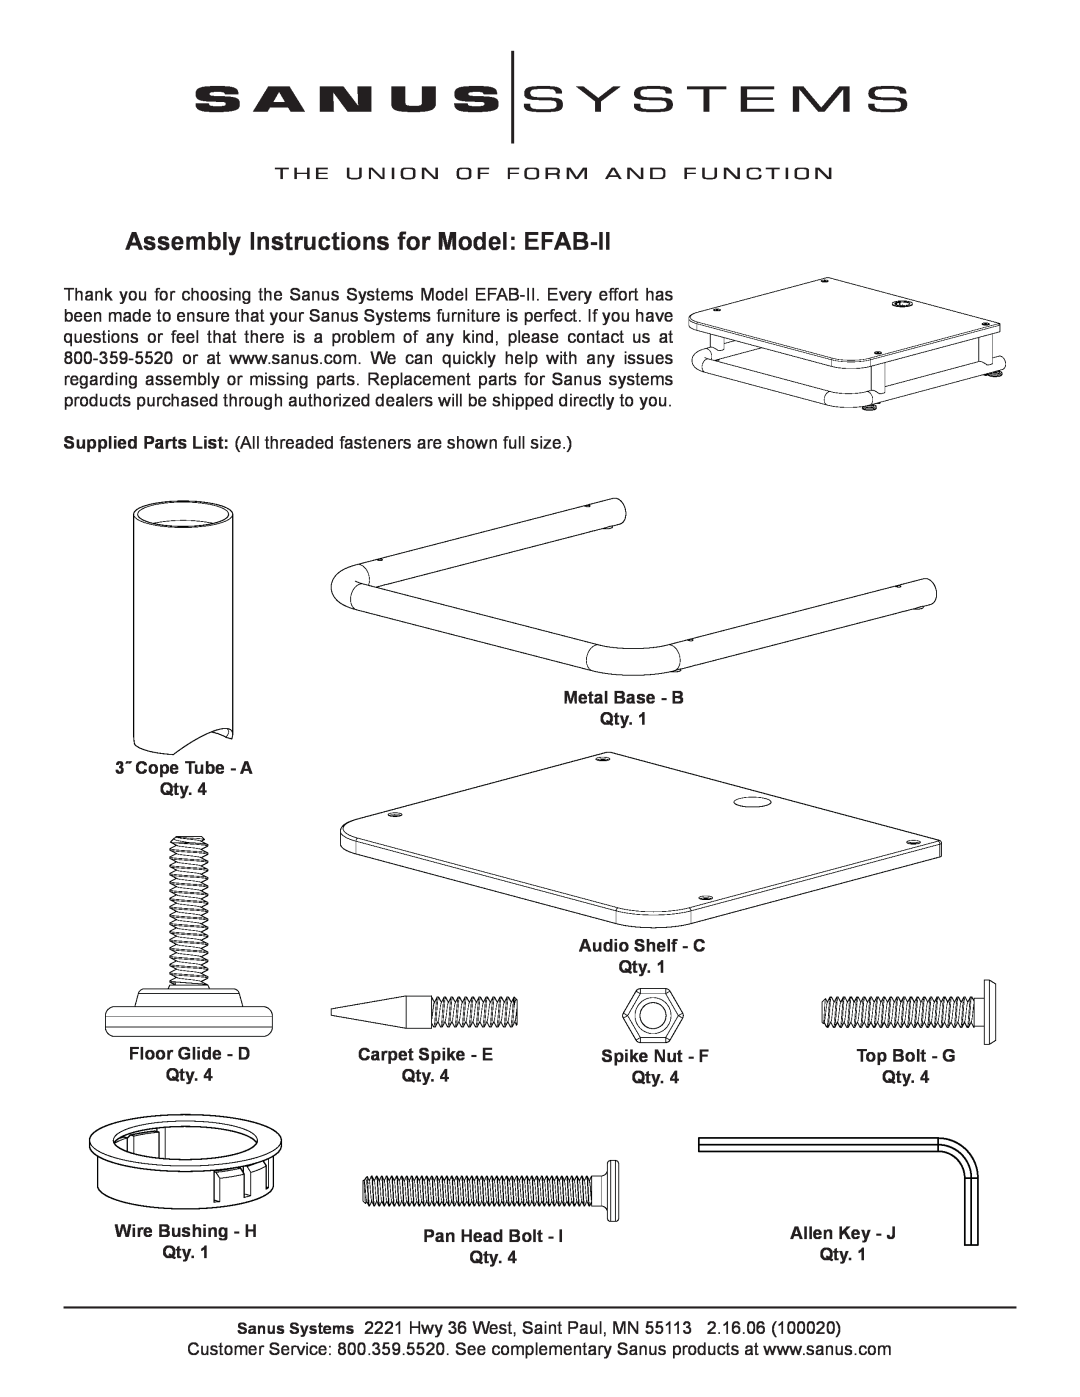 Sanus Systems manual Assembly Instructions for Model EFAB-II 